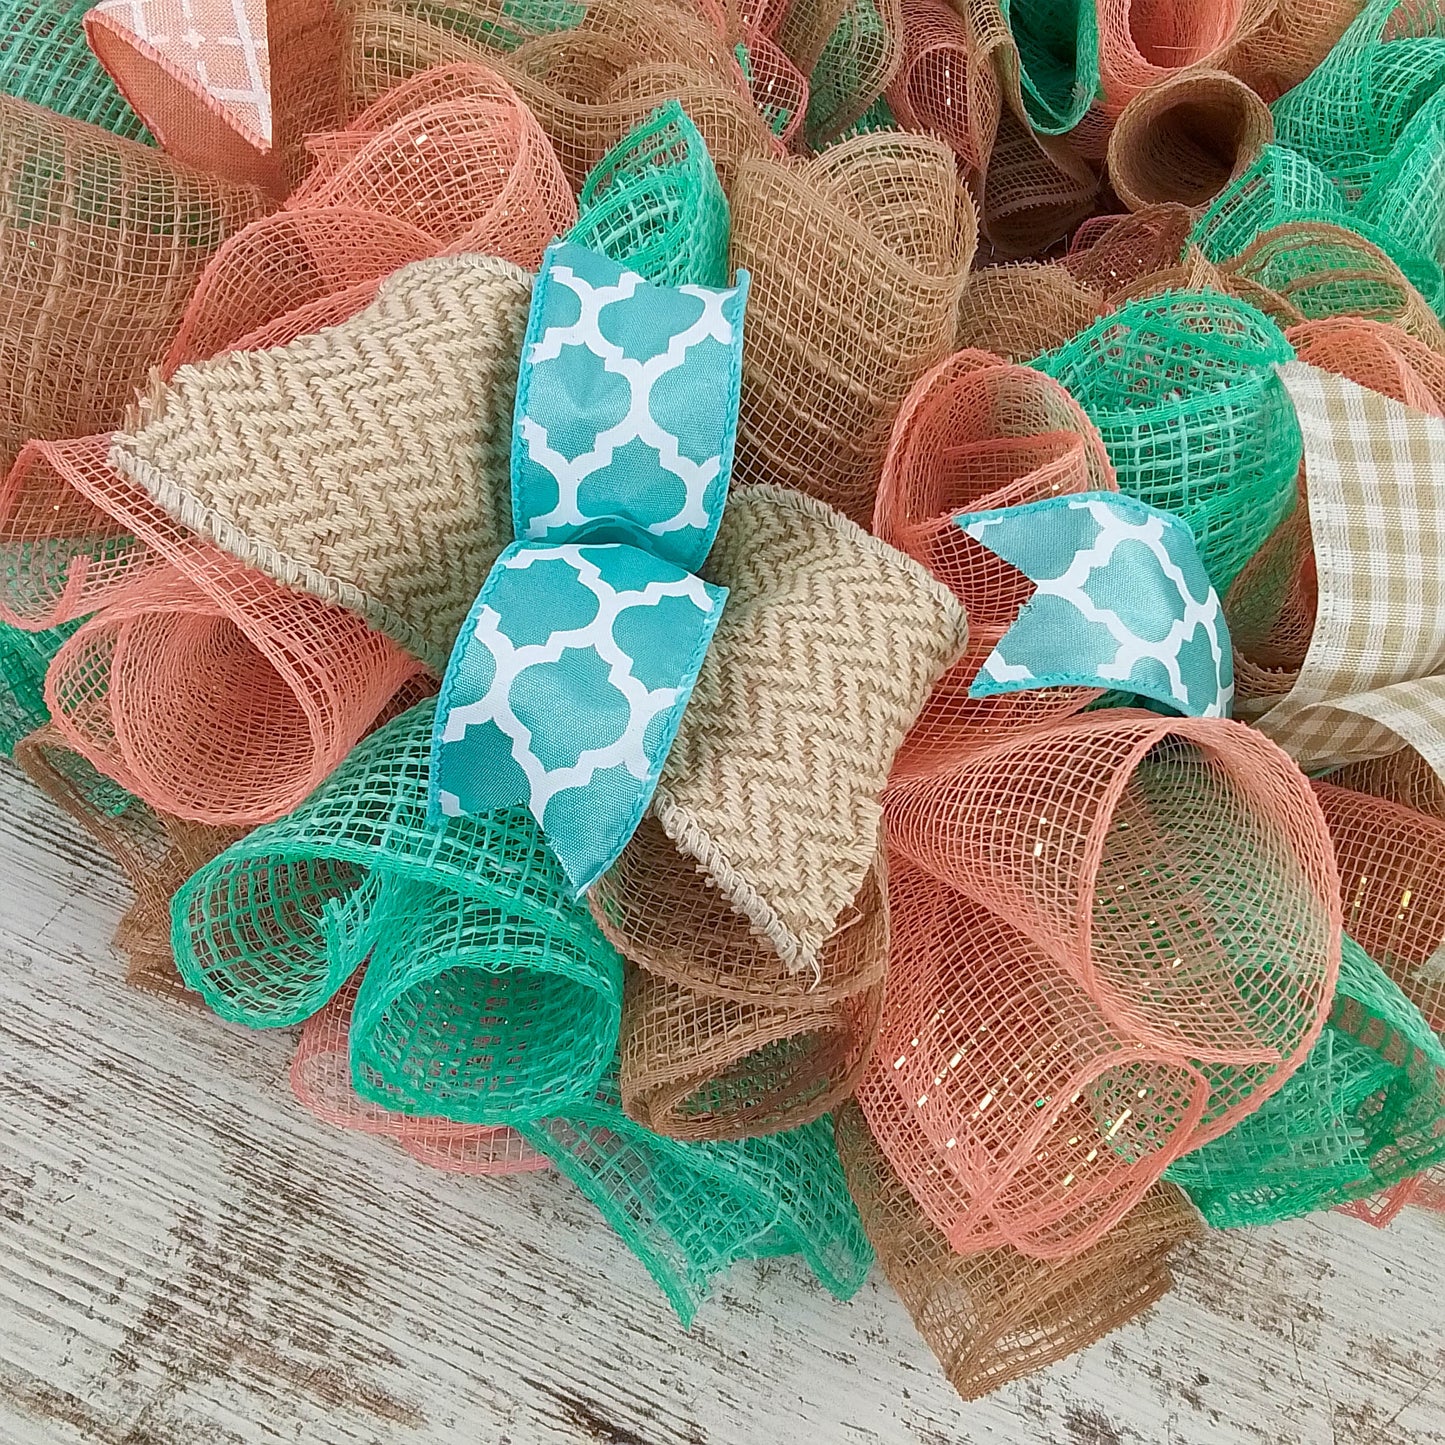 Coral and Mint Year Round Wreath, Everyday Wreath for Front Door